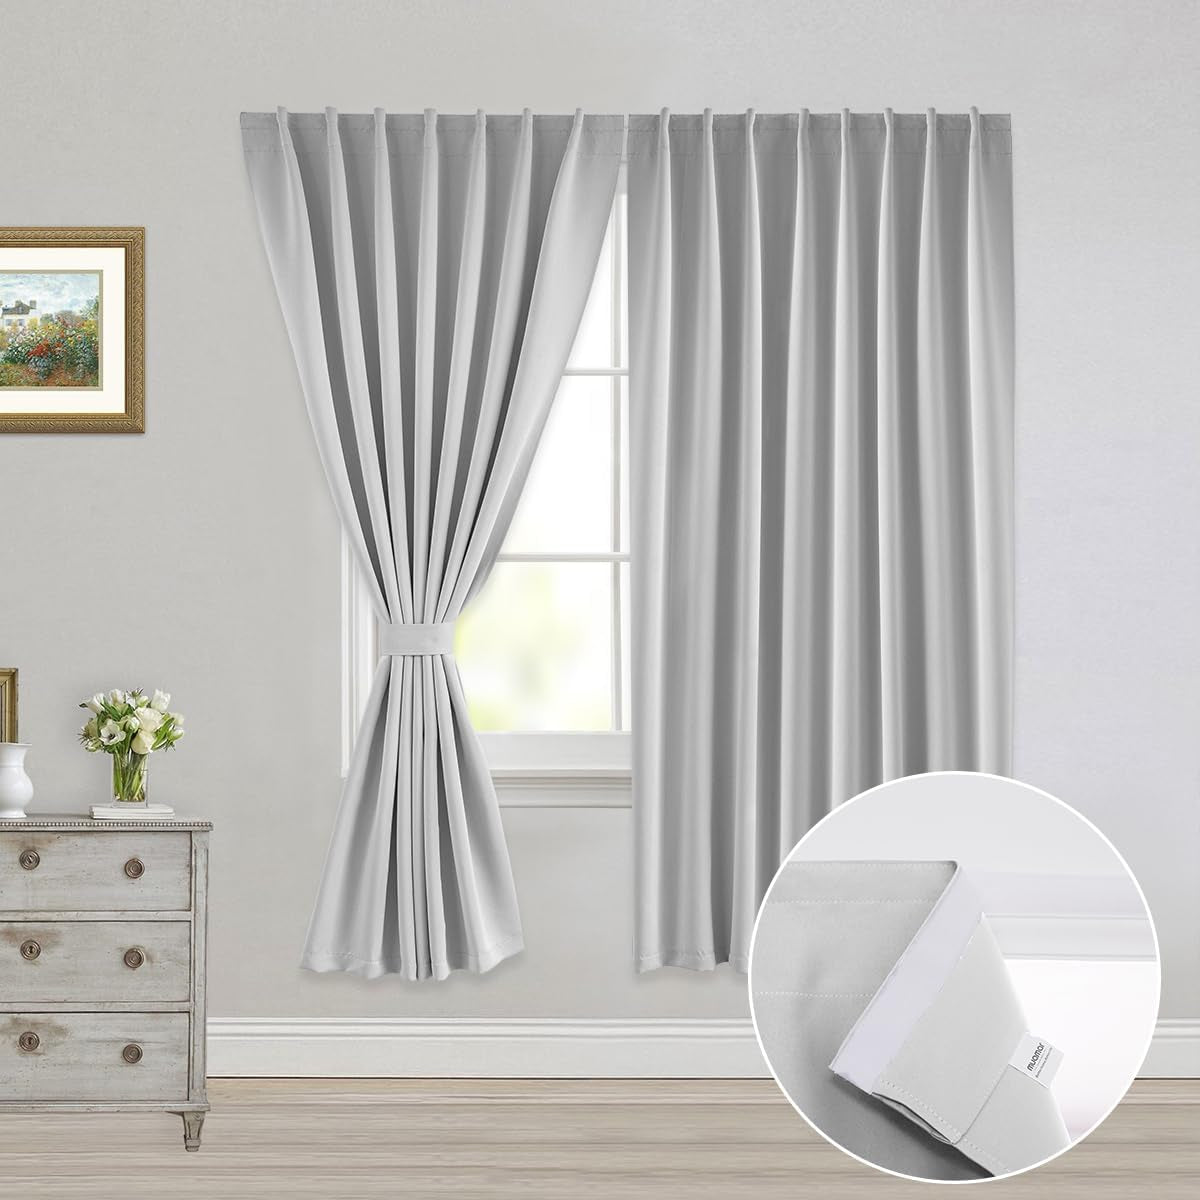 Muamar 2Pcs Blackout Curtains Privacy Curtains 63 Inch Length Window Curtains,Easy Install Thermal Insulated Window Shades,Stick Curtains No Rods, Black 42" W X 63" L  Muamar White 52"W X 63"L 